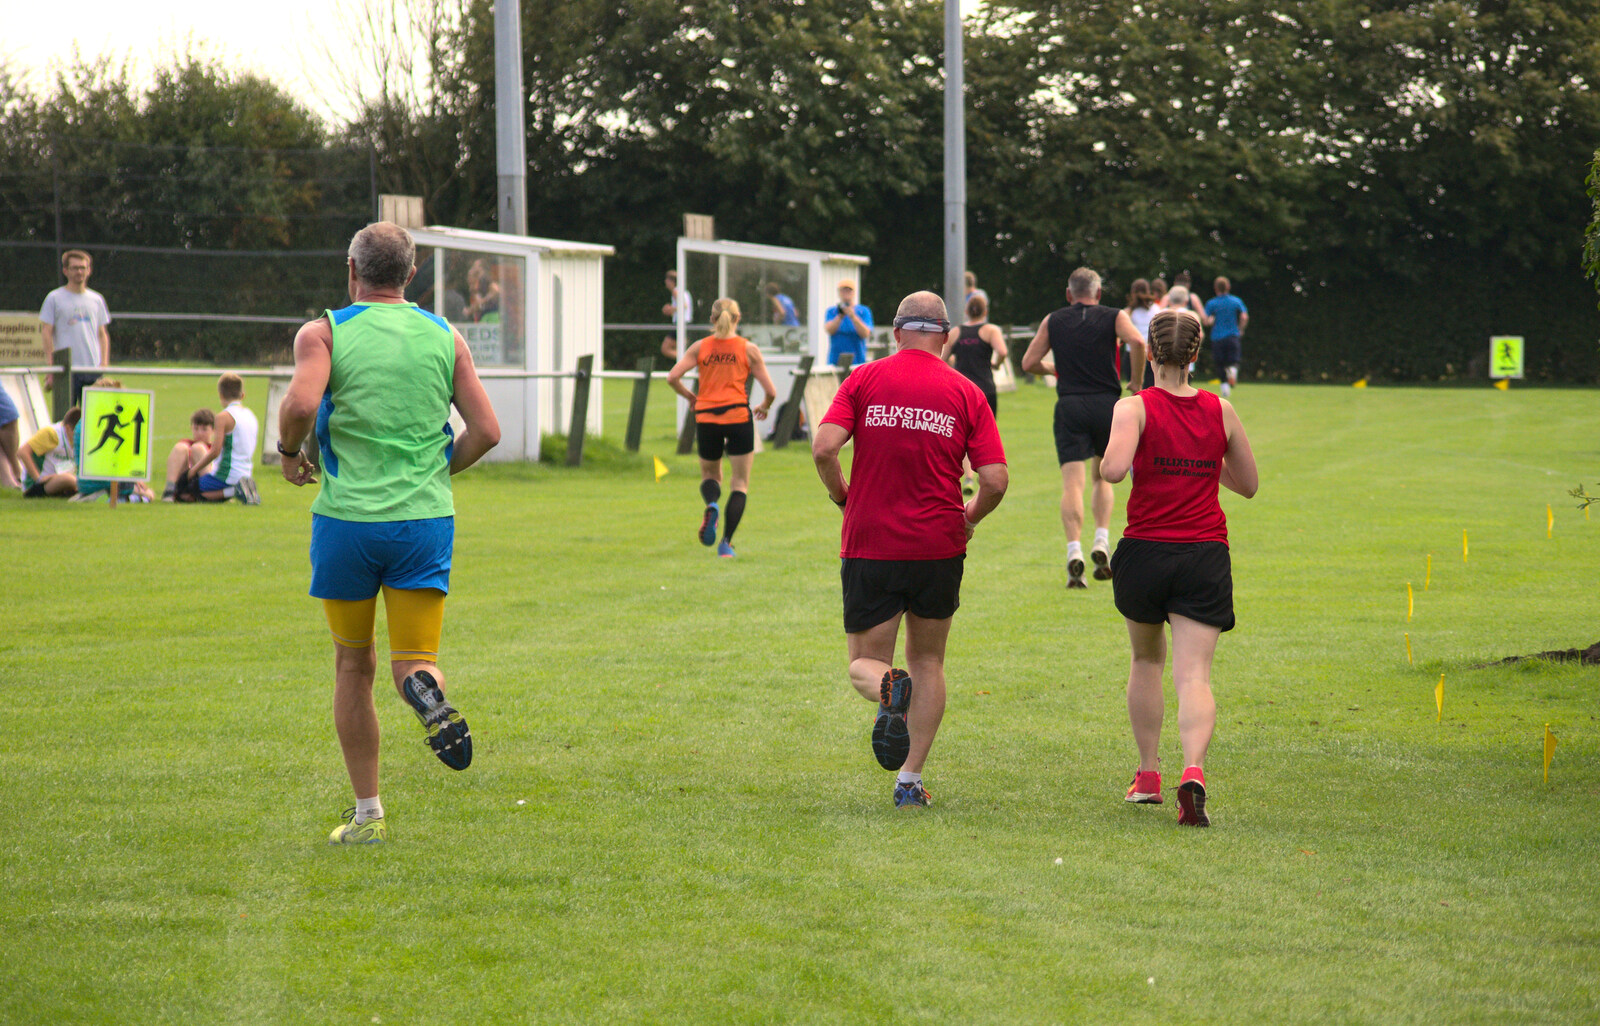 The event moves up to the playing fields from The Framlingham 10k Run, Suffolk - 31st August 2014